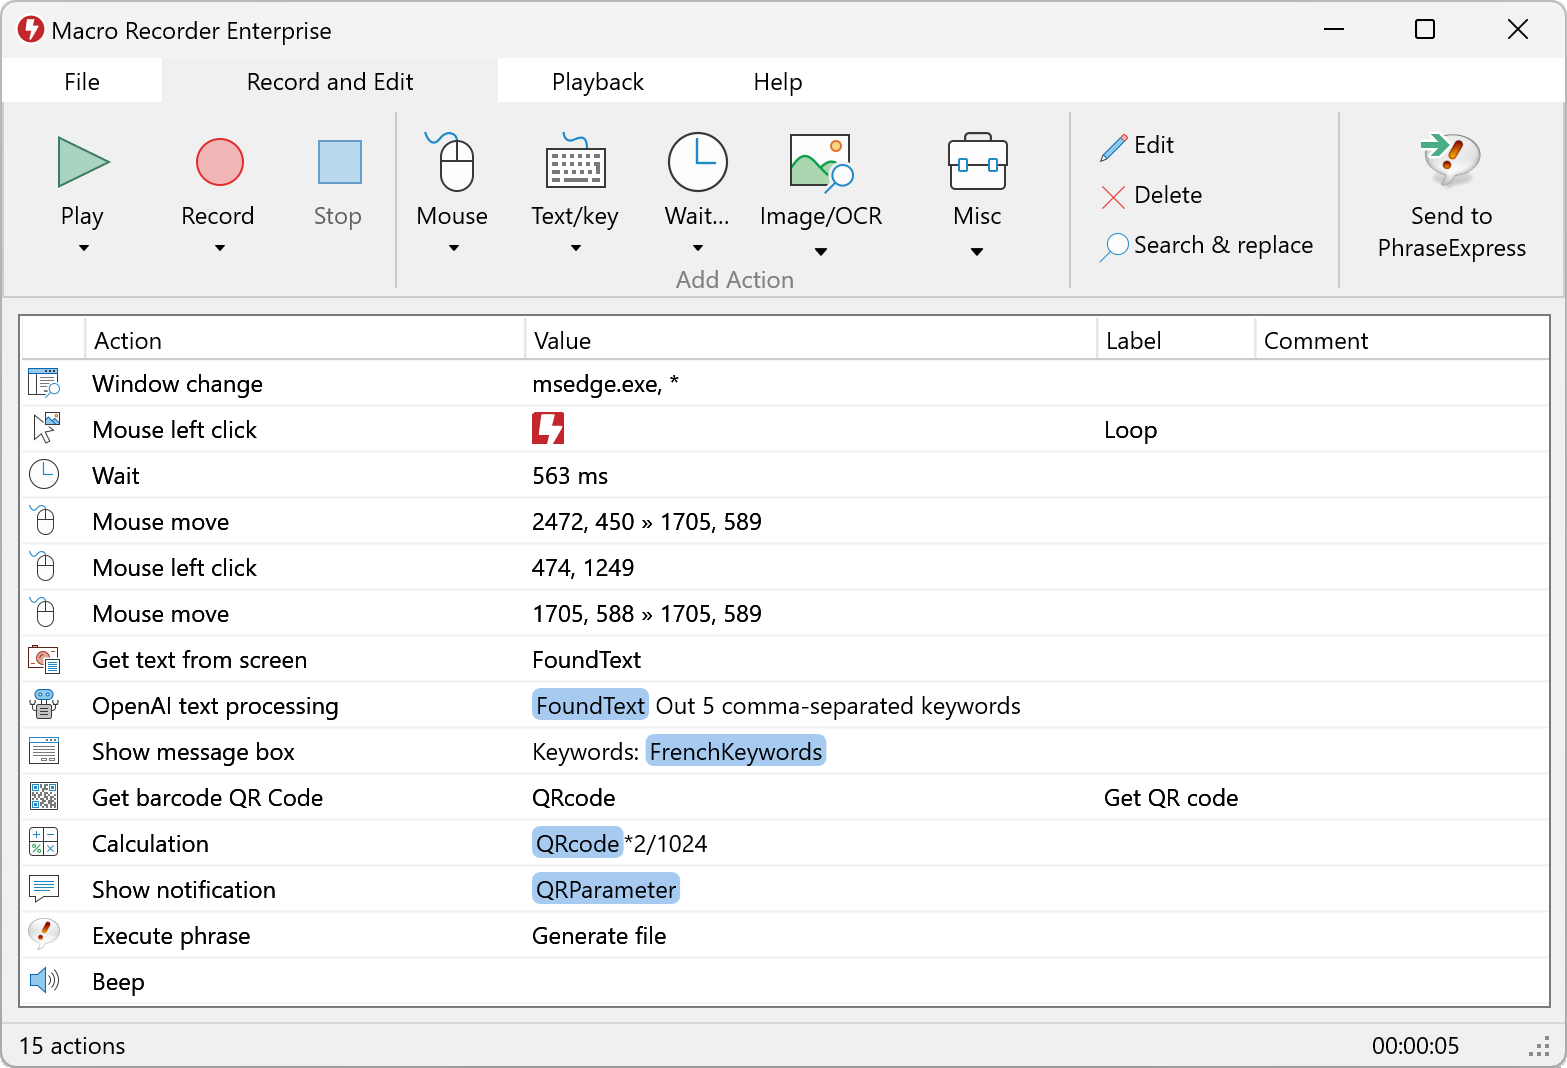 Main program window with the editable list of recorded actions